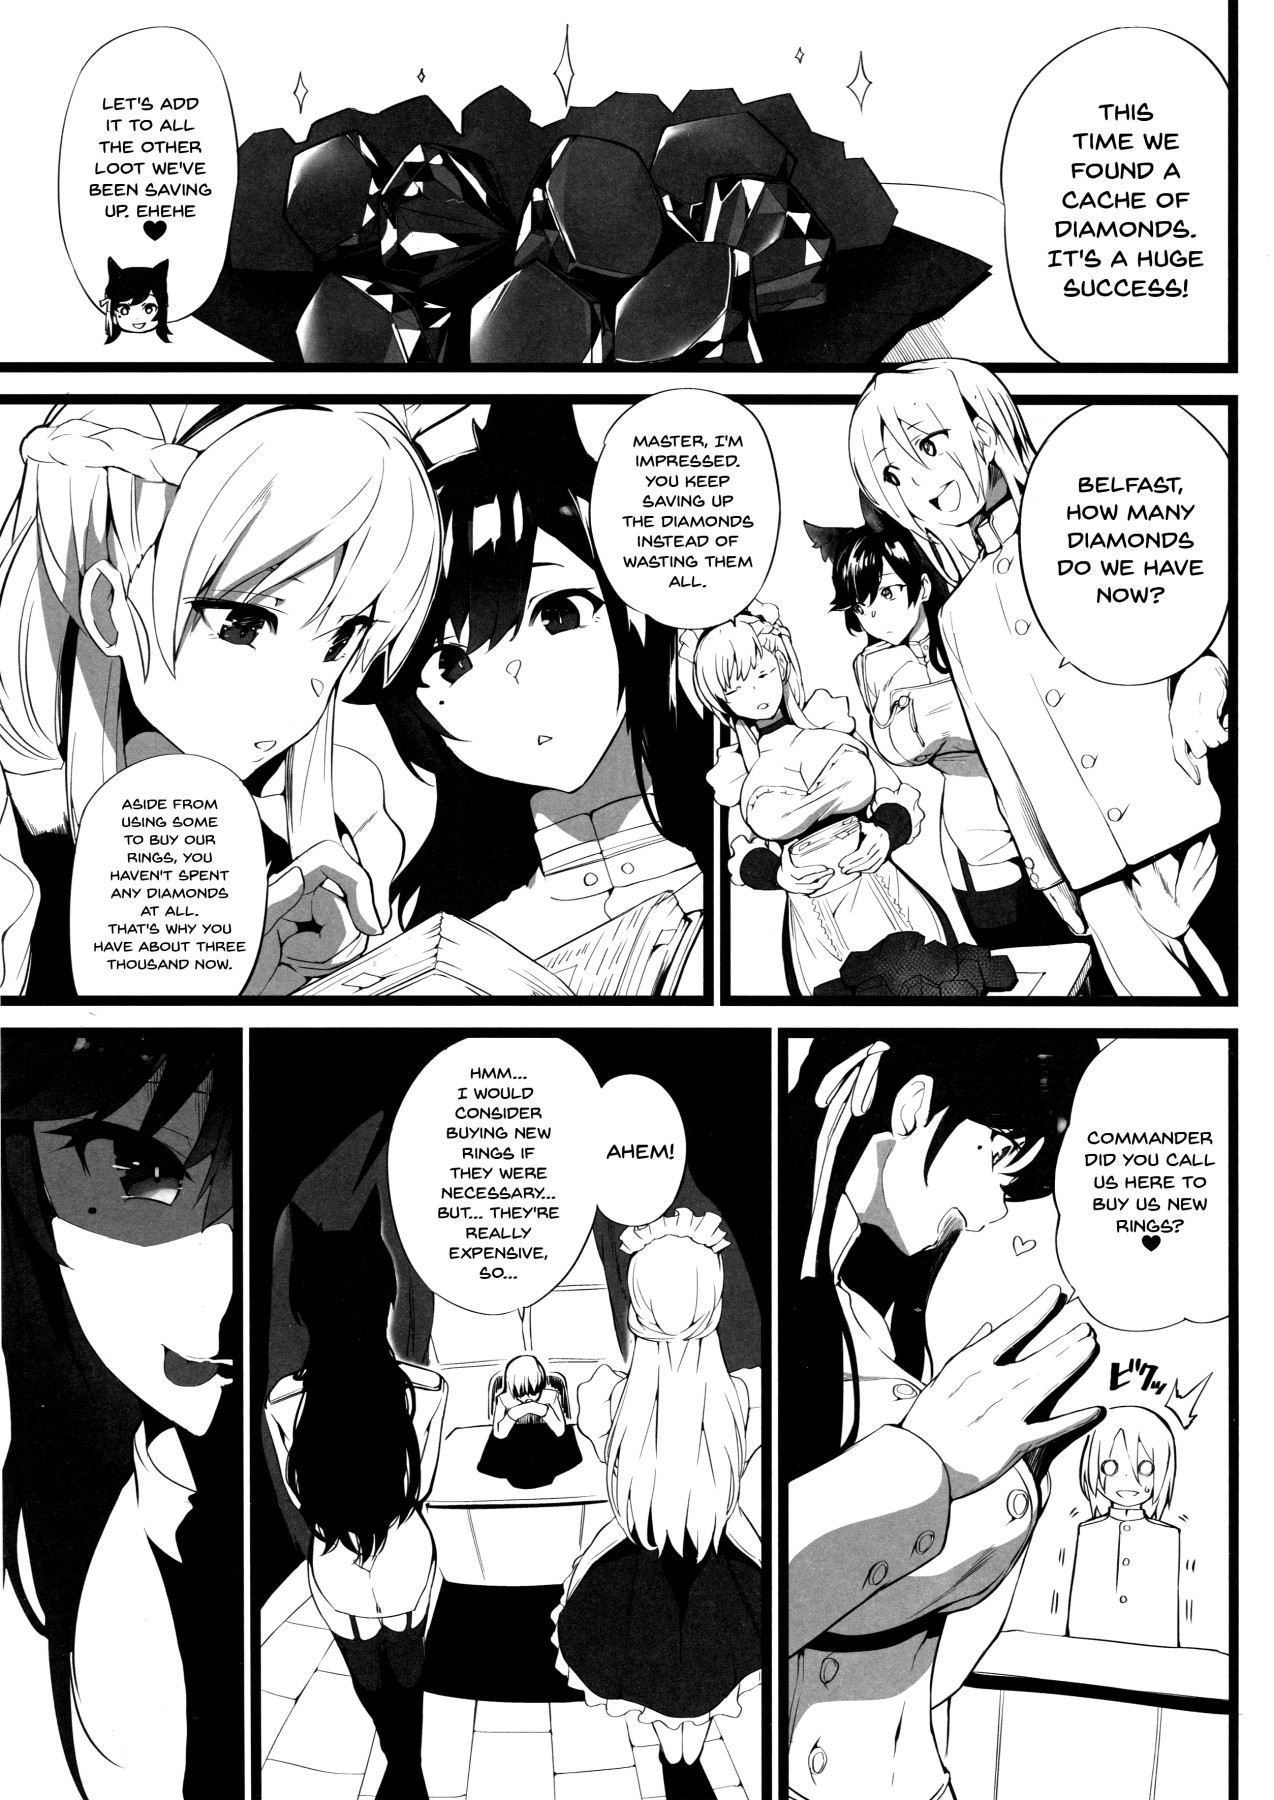 Hentai Manga Comic-The Last Way to Make Your F2P Commander Buy You a Ring 3-Read-2